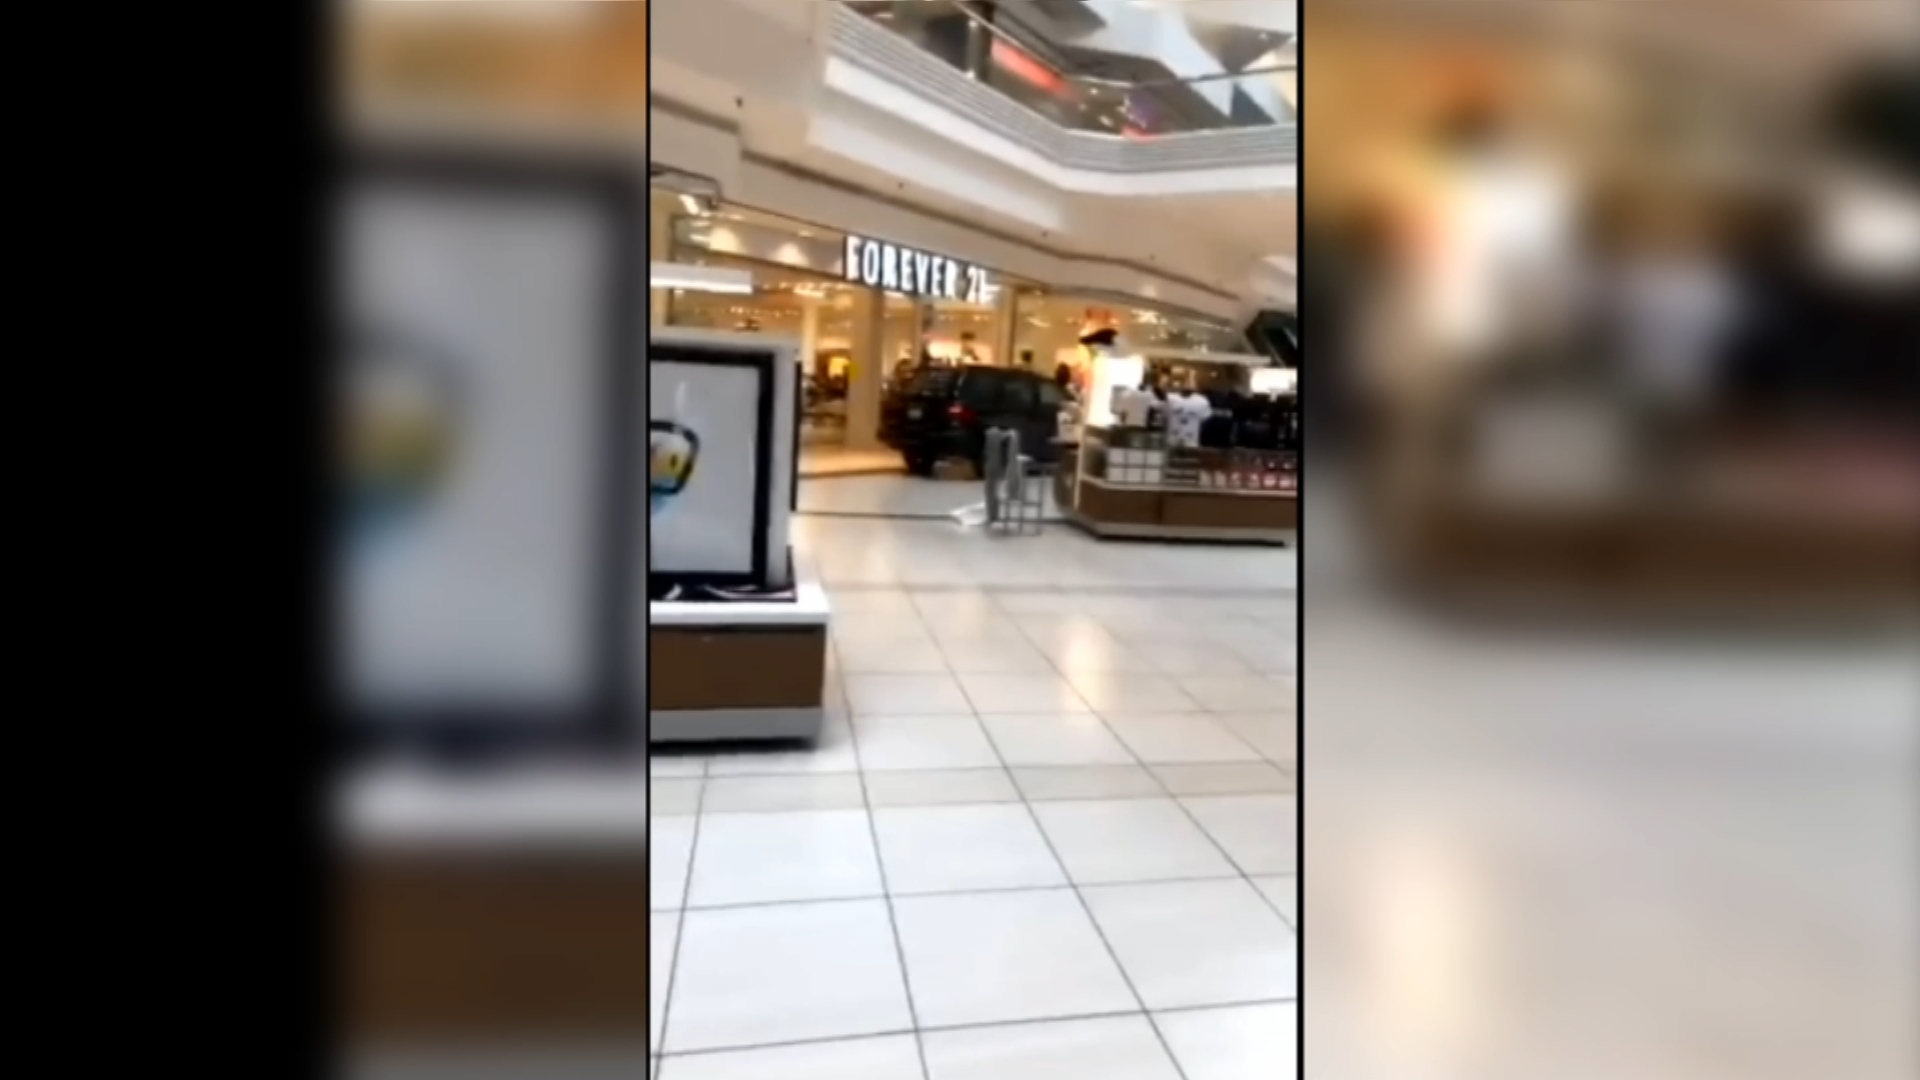 Video Shows Vehicle Driving Through Woodfield Mall